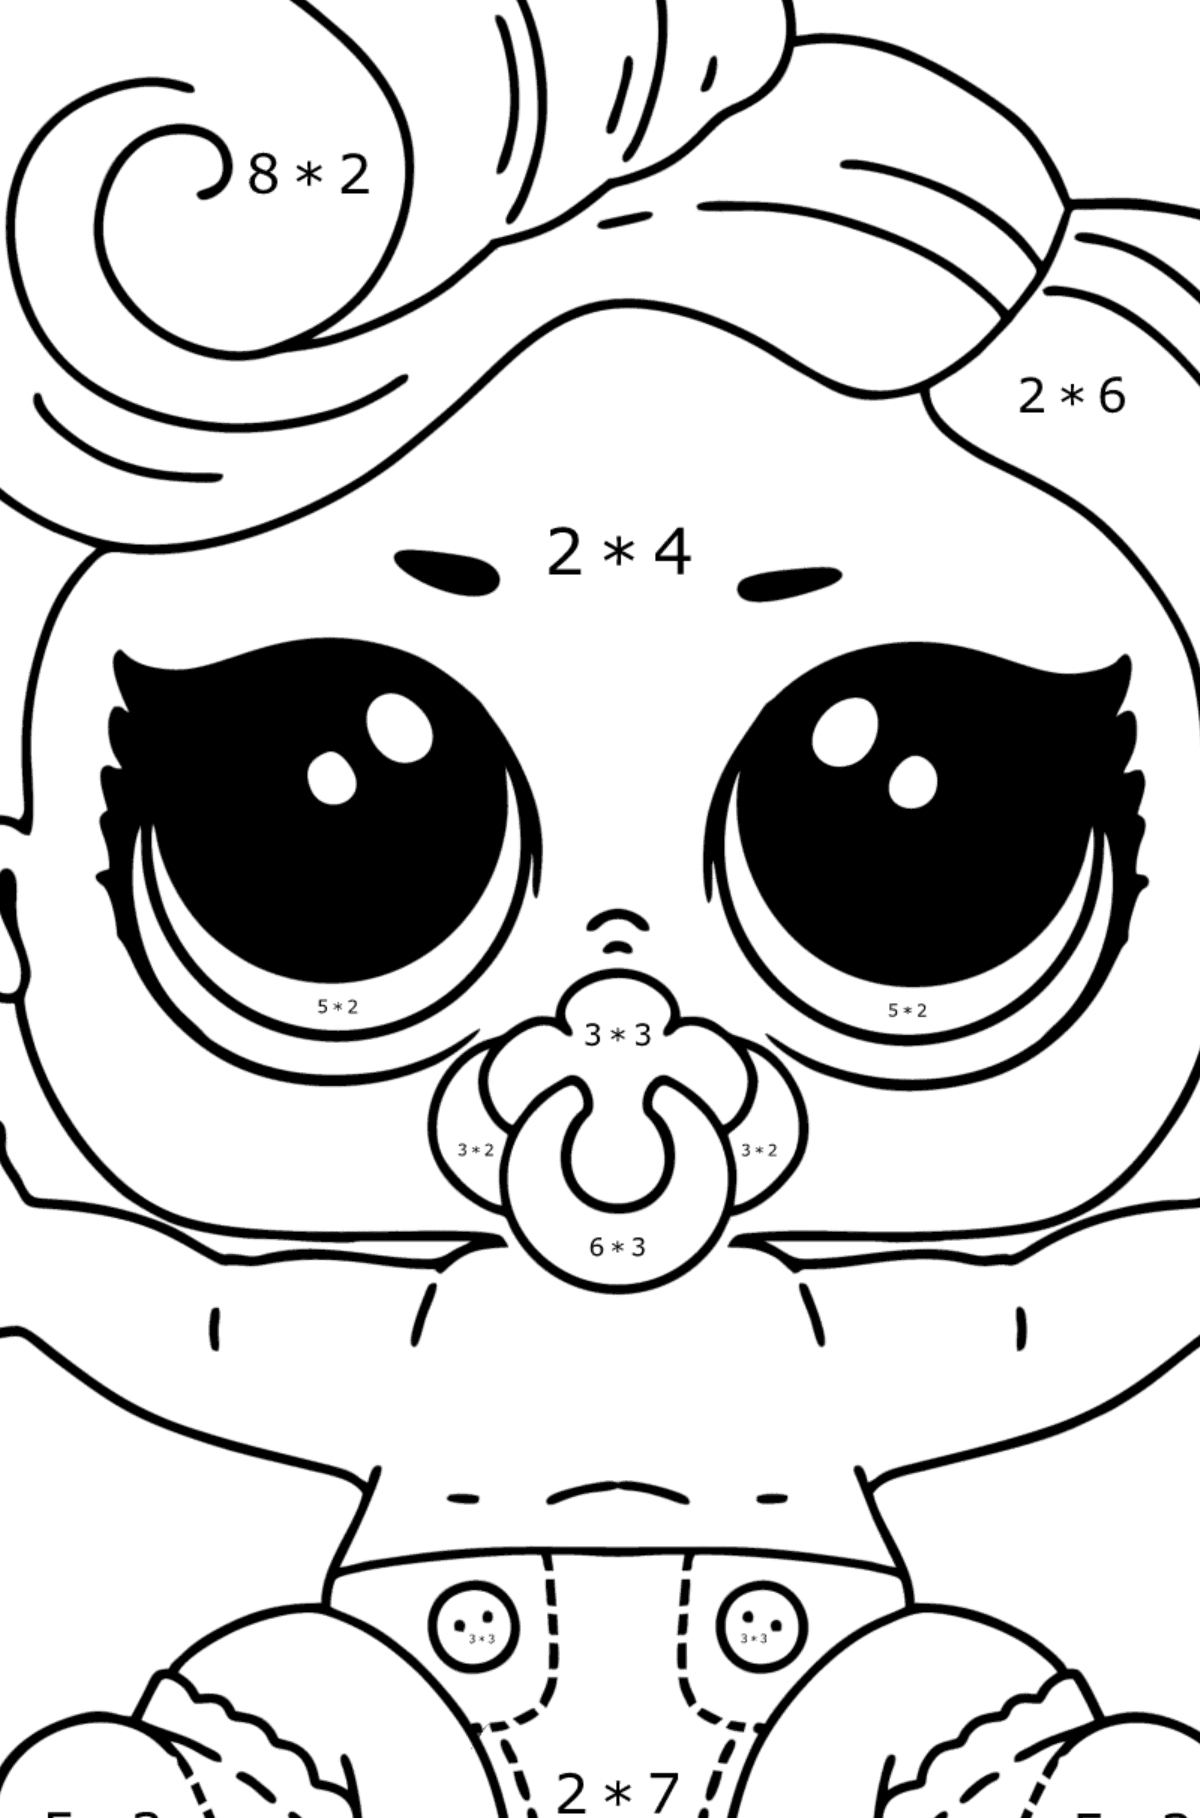 Coloring page LOL LIL Lux - Math Coloring - Multiplication for Kids